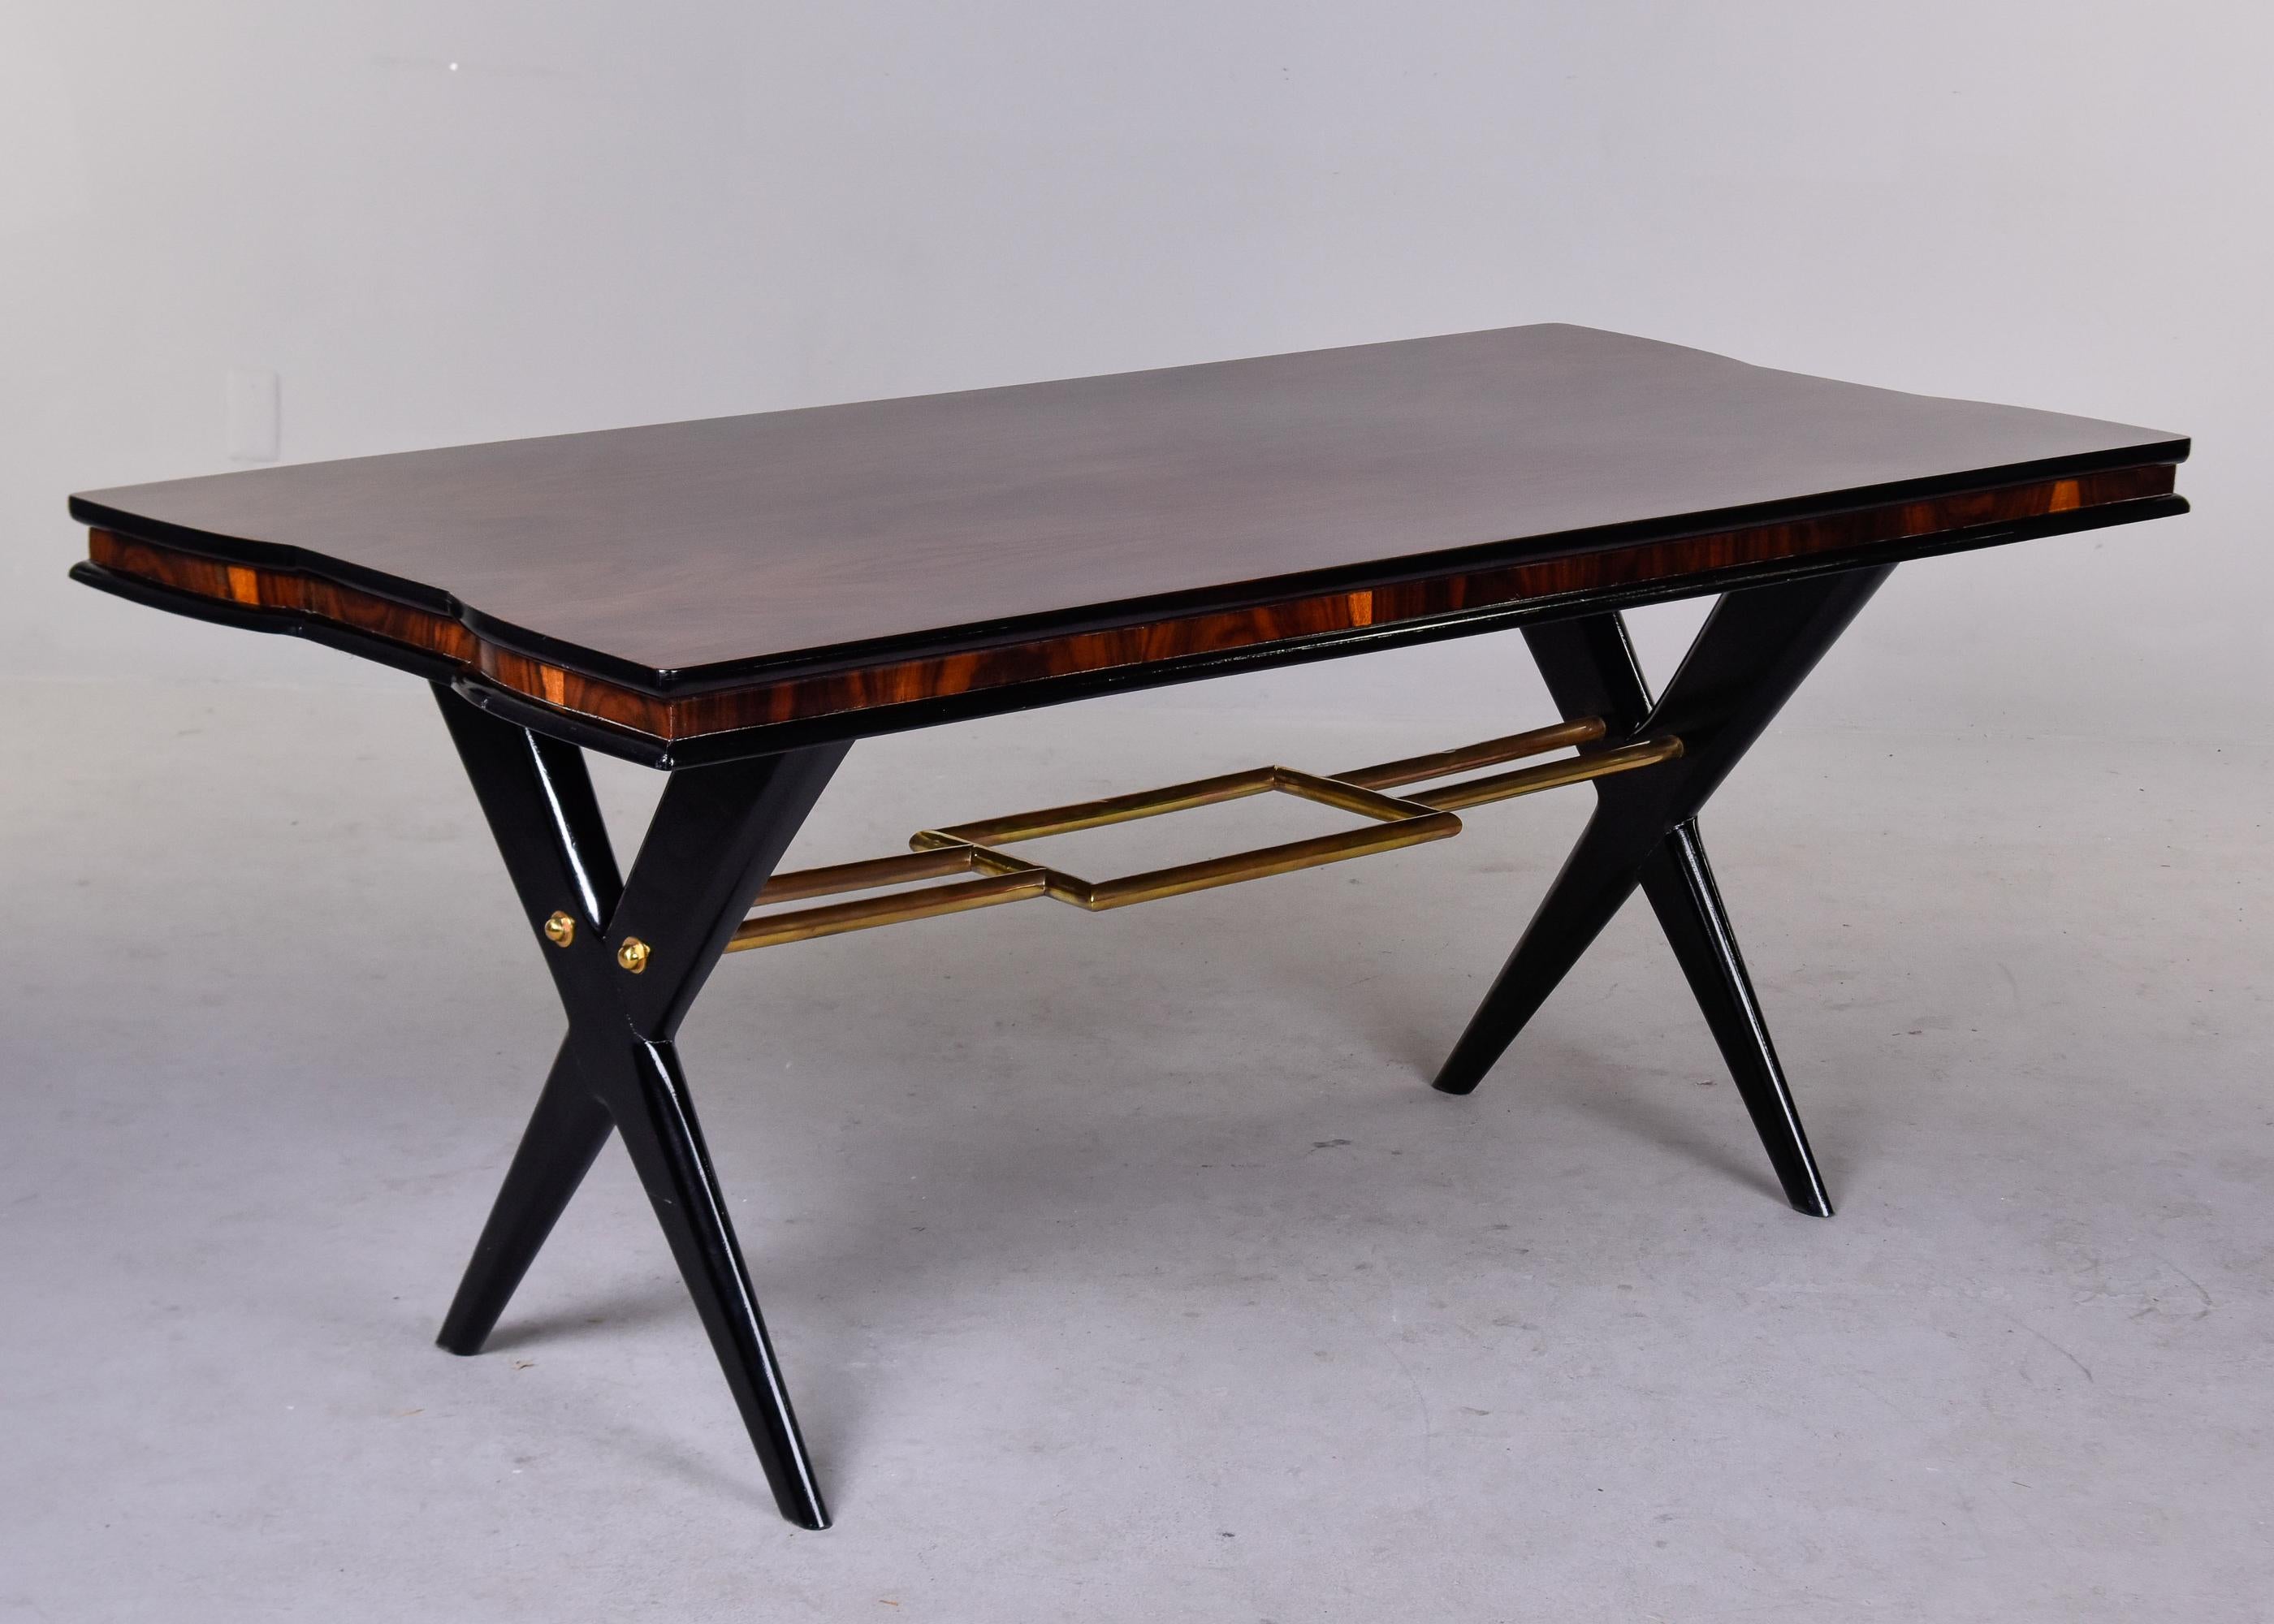 Art Deco Italian Rosewood Dining Table with Decorative Brass Stretcher In Good Condition For Sale In Troy, MI